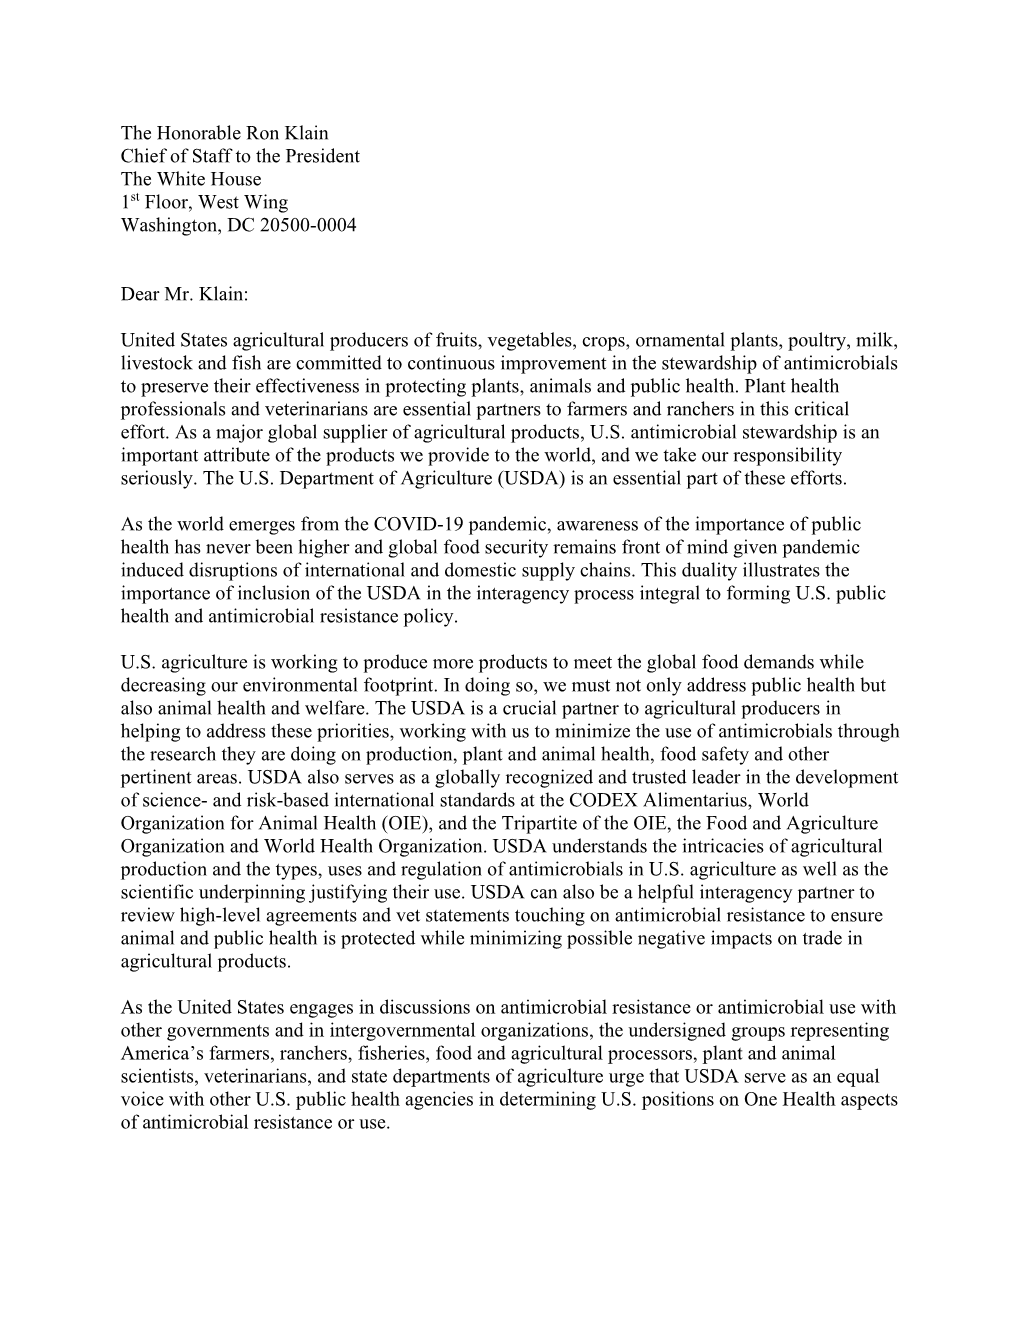 FASS Joined Over 50 Other Organizations in a Letter to President Biden's Chief of Staff Strongly